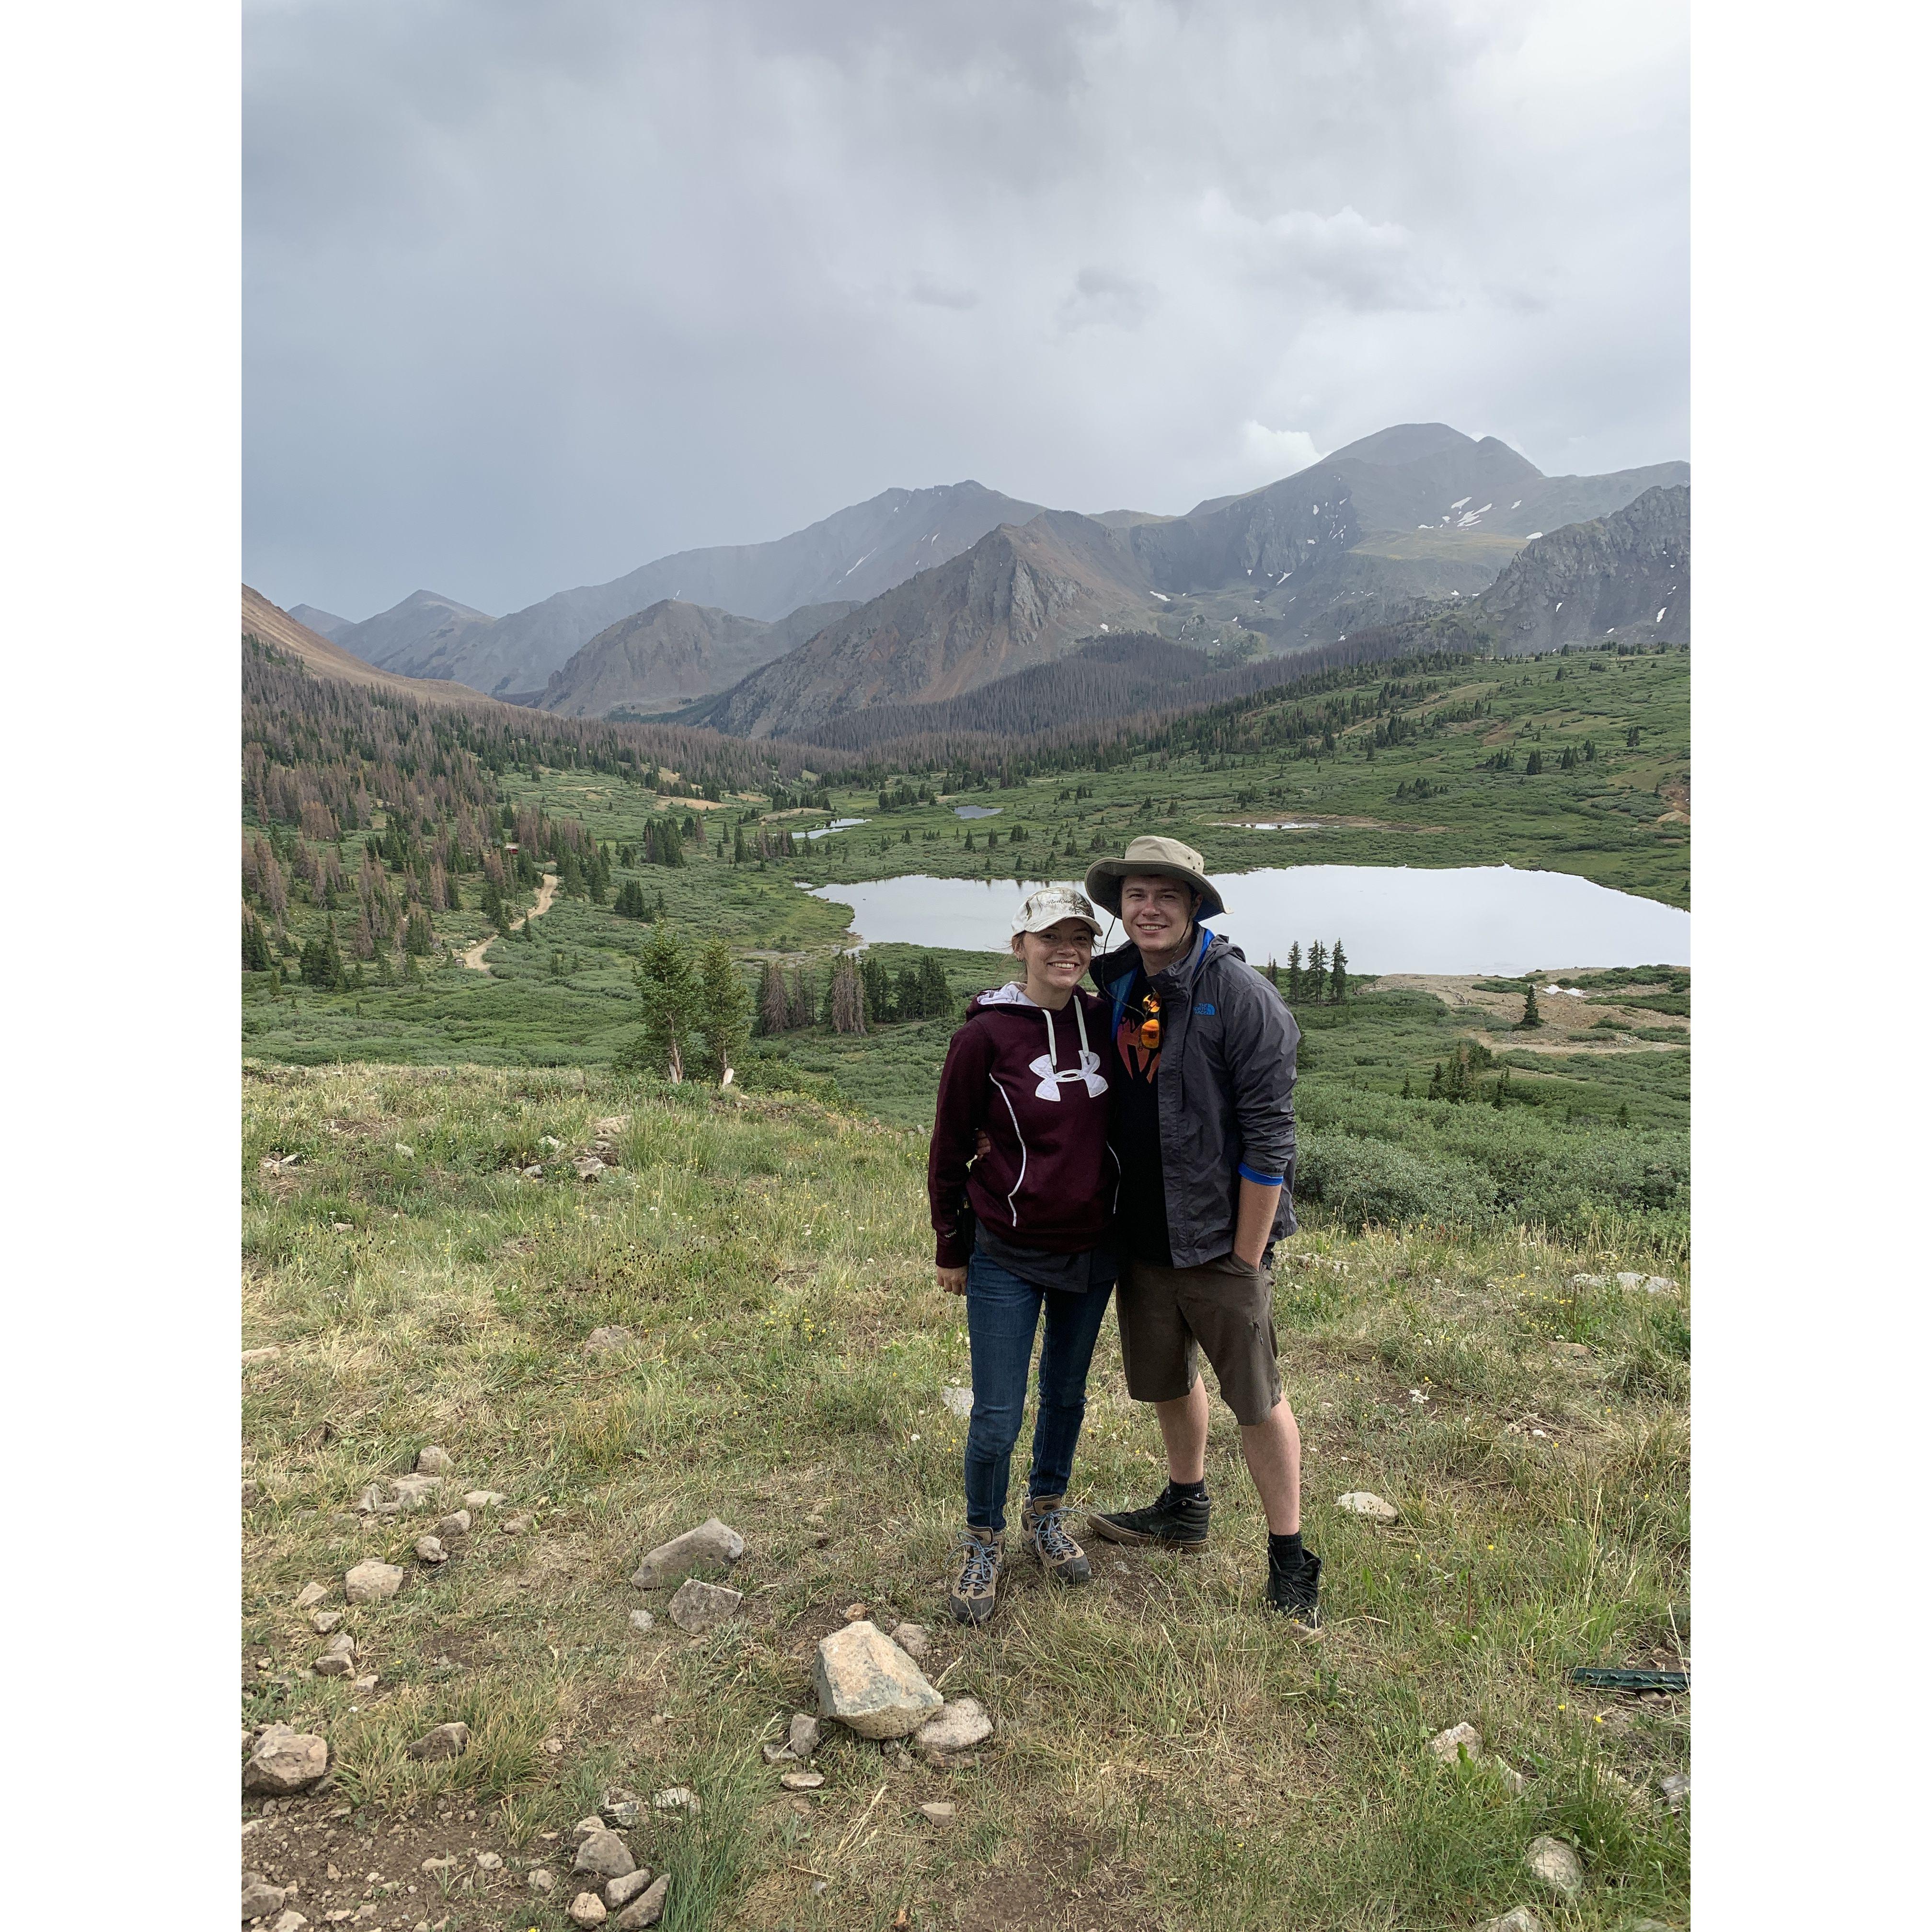 Camping and visiting remote areas in the mountains is one of Michael and Alyvia's way of spending quality time together.